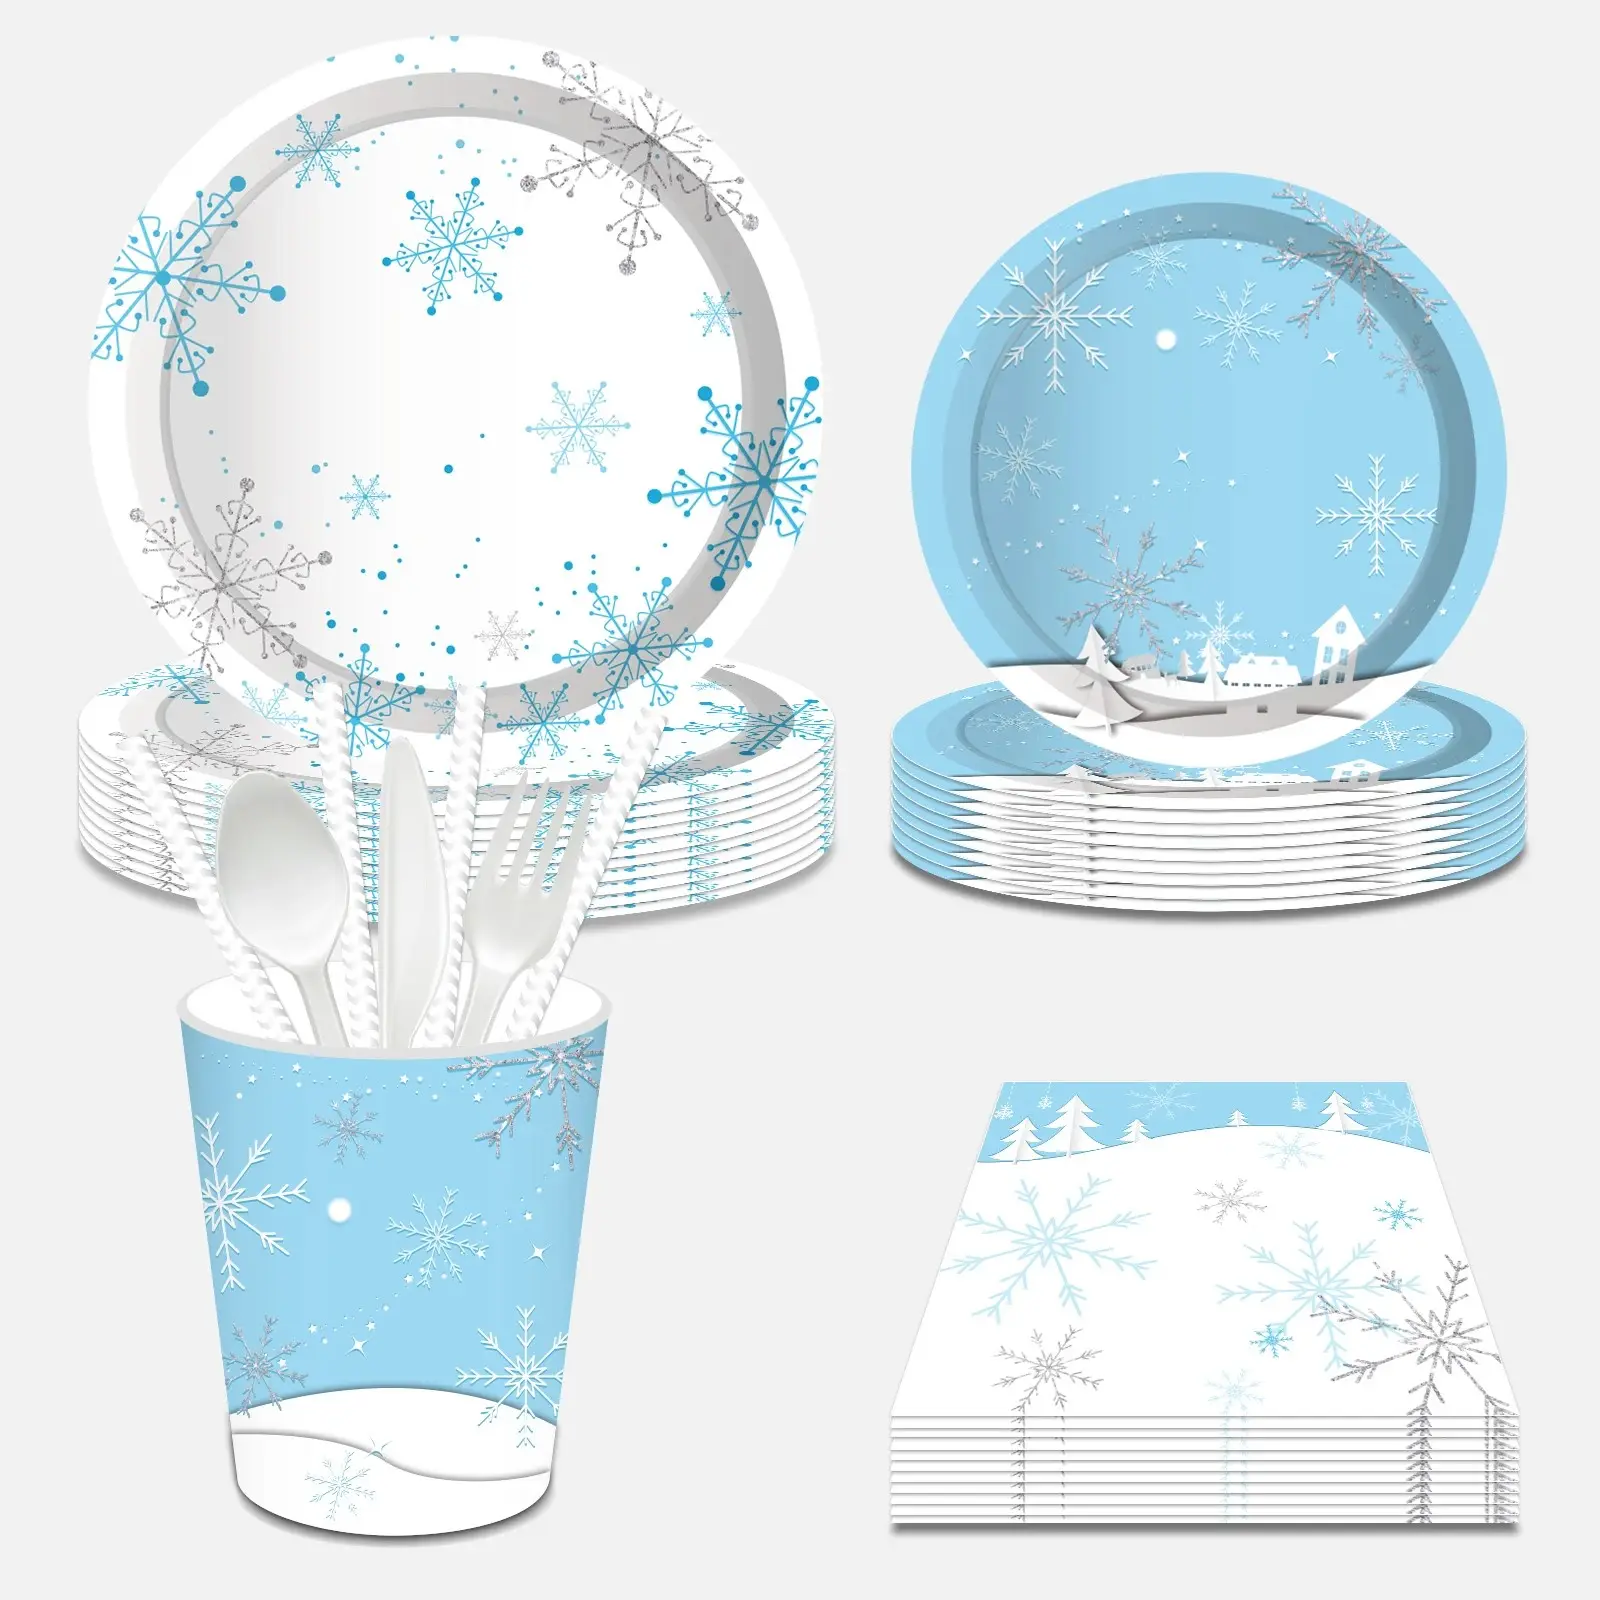 Romantic snow Scene party disposable cutlery sets cups, plates, and napkins for Merry Christmas and New Year celebrations